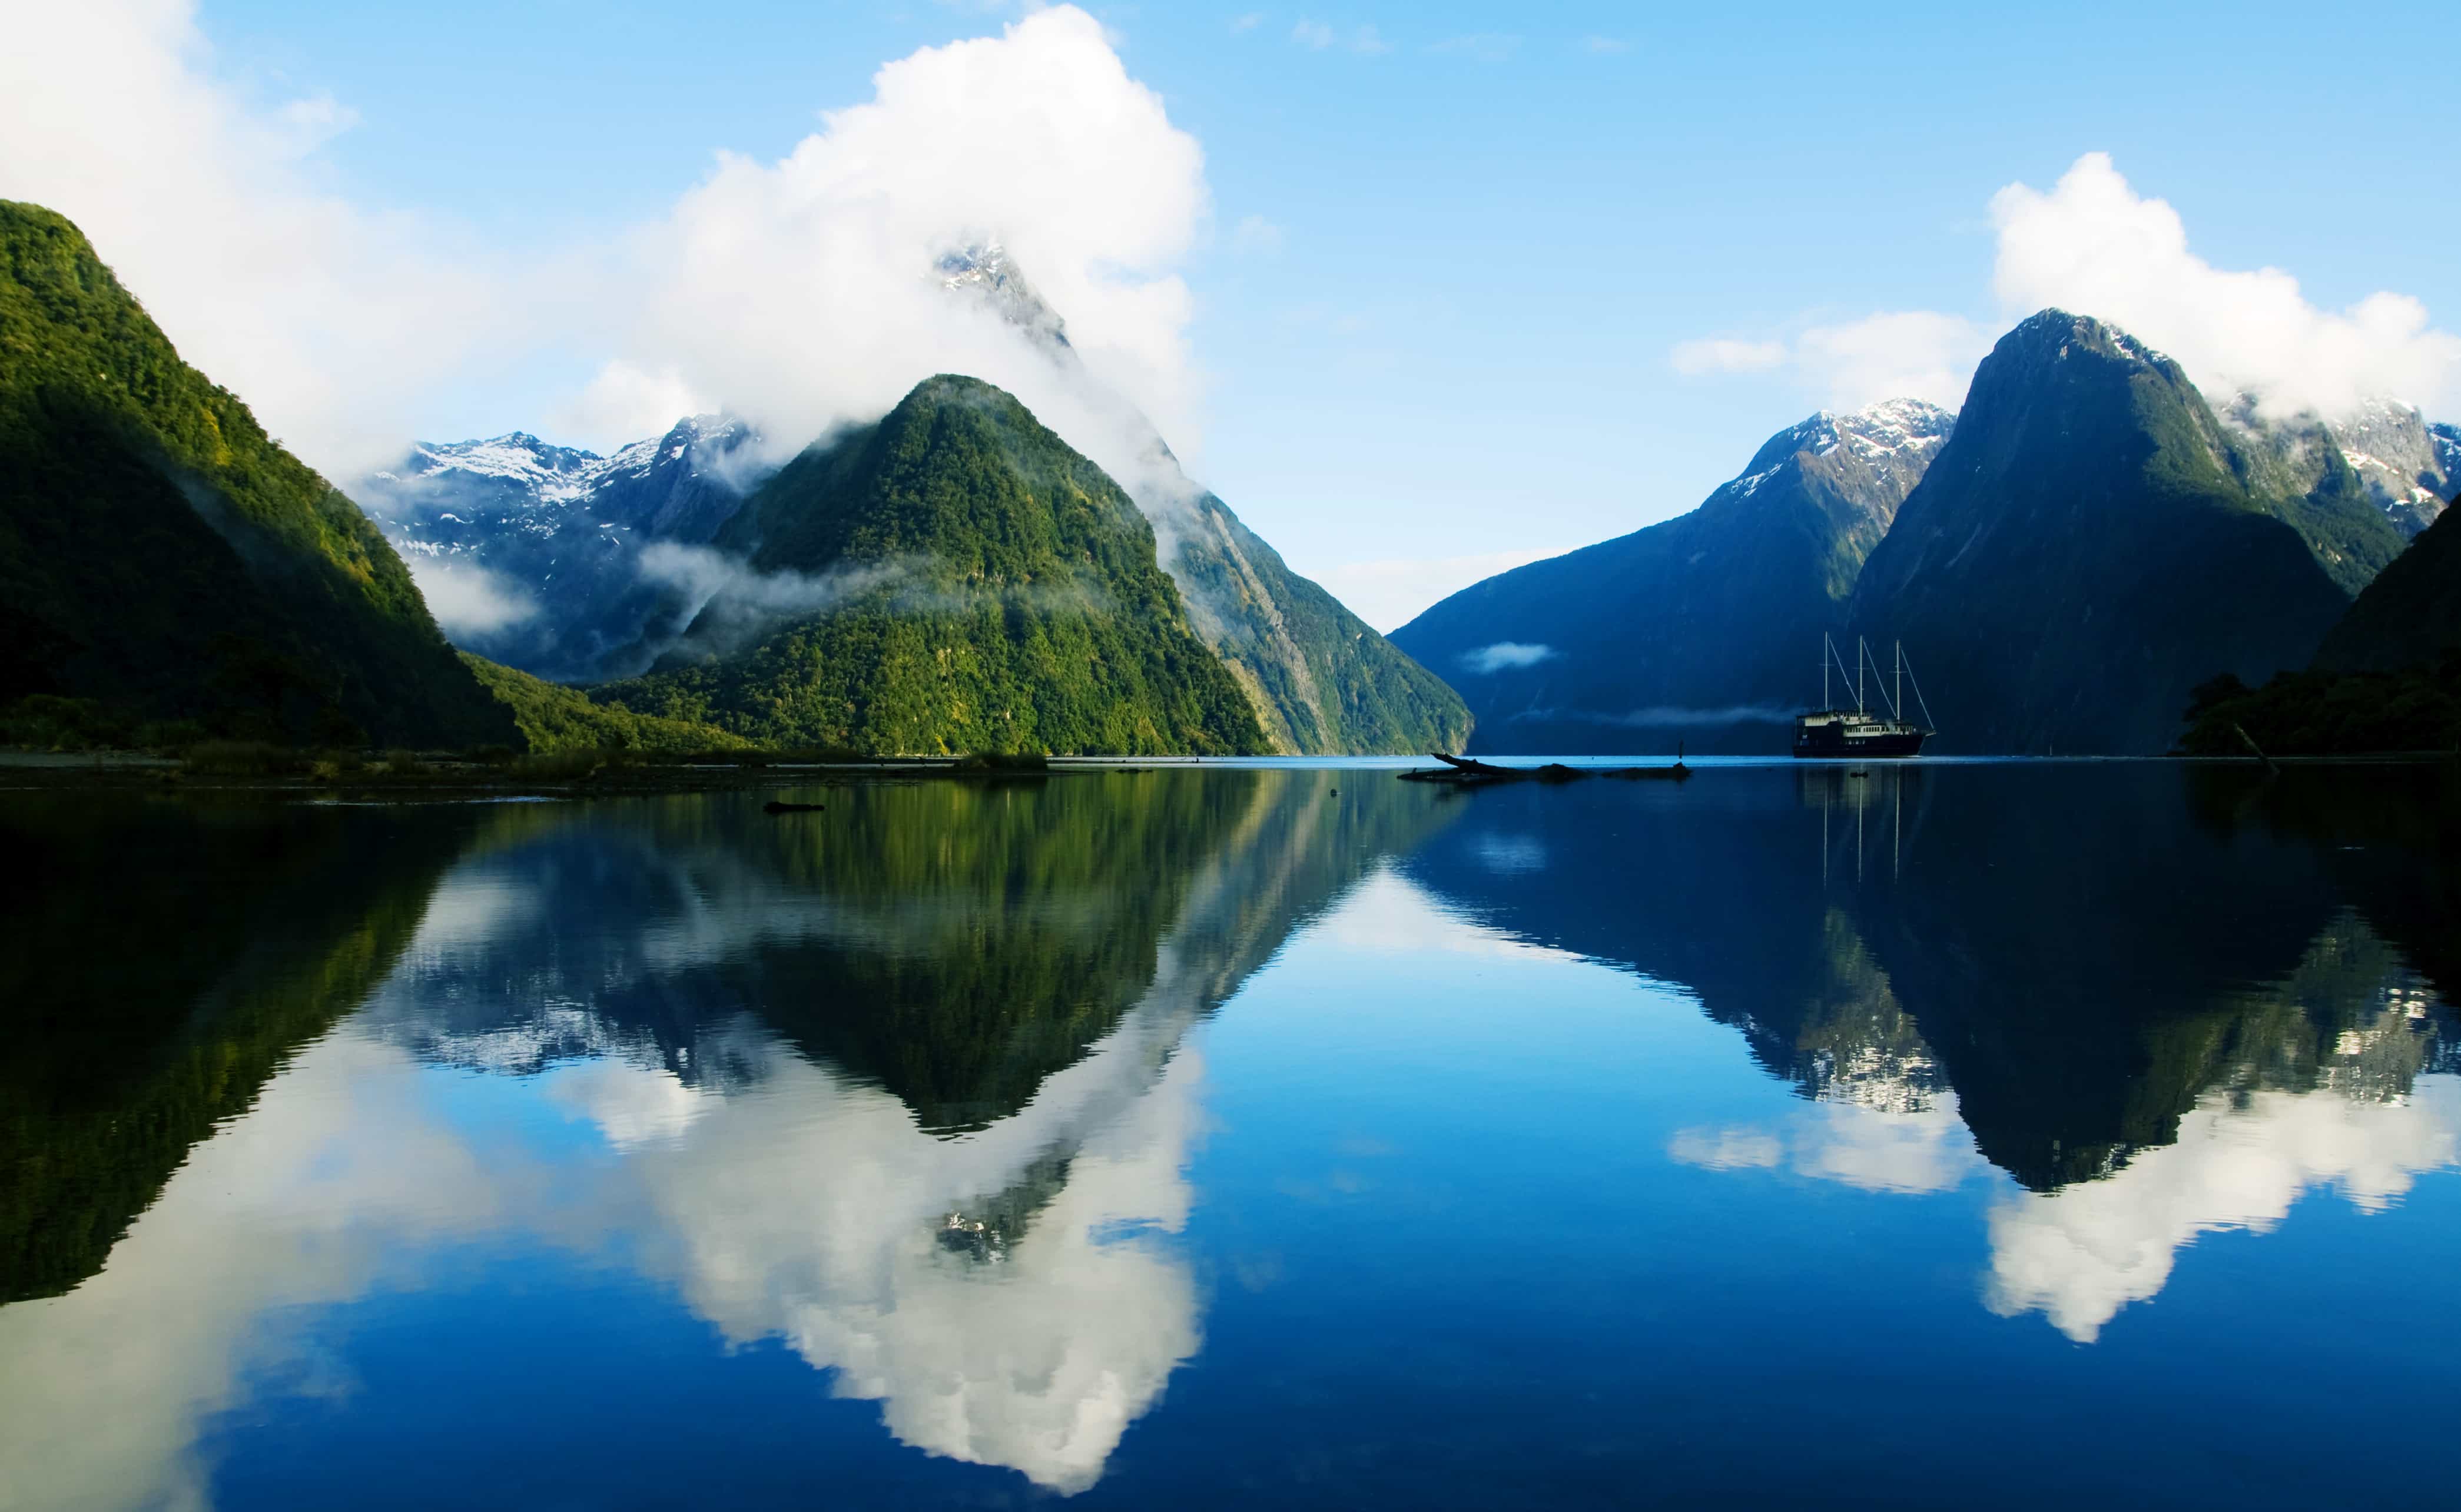 Emerald mountains rising from the glassy waters of New Zealand, a site to behold on your New Zealnd yacht charter